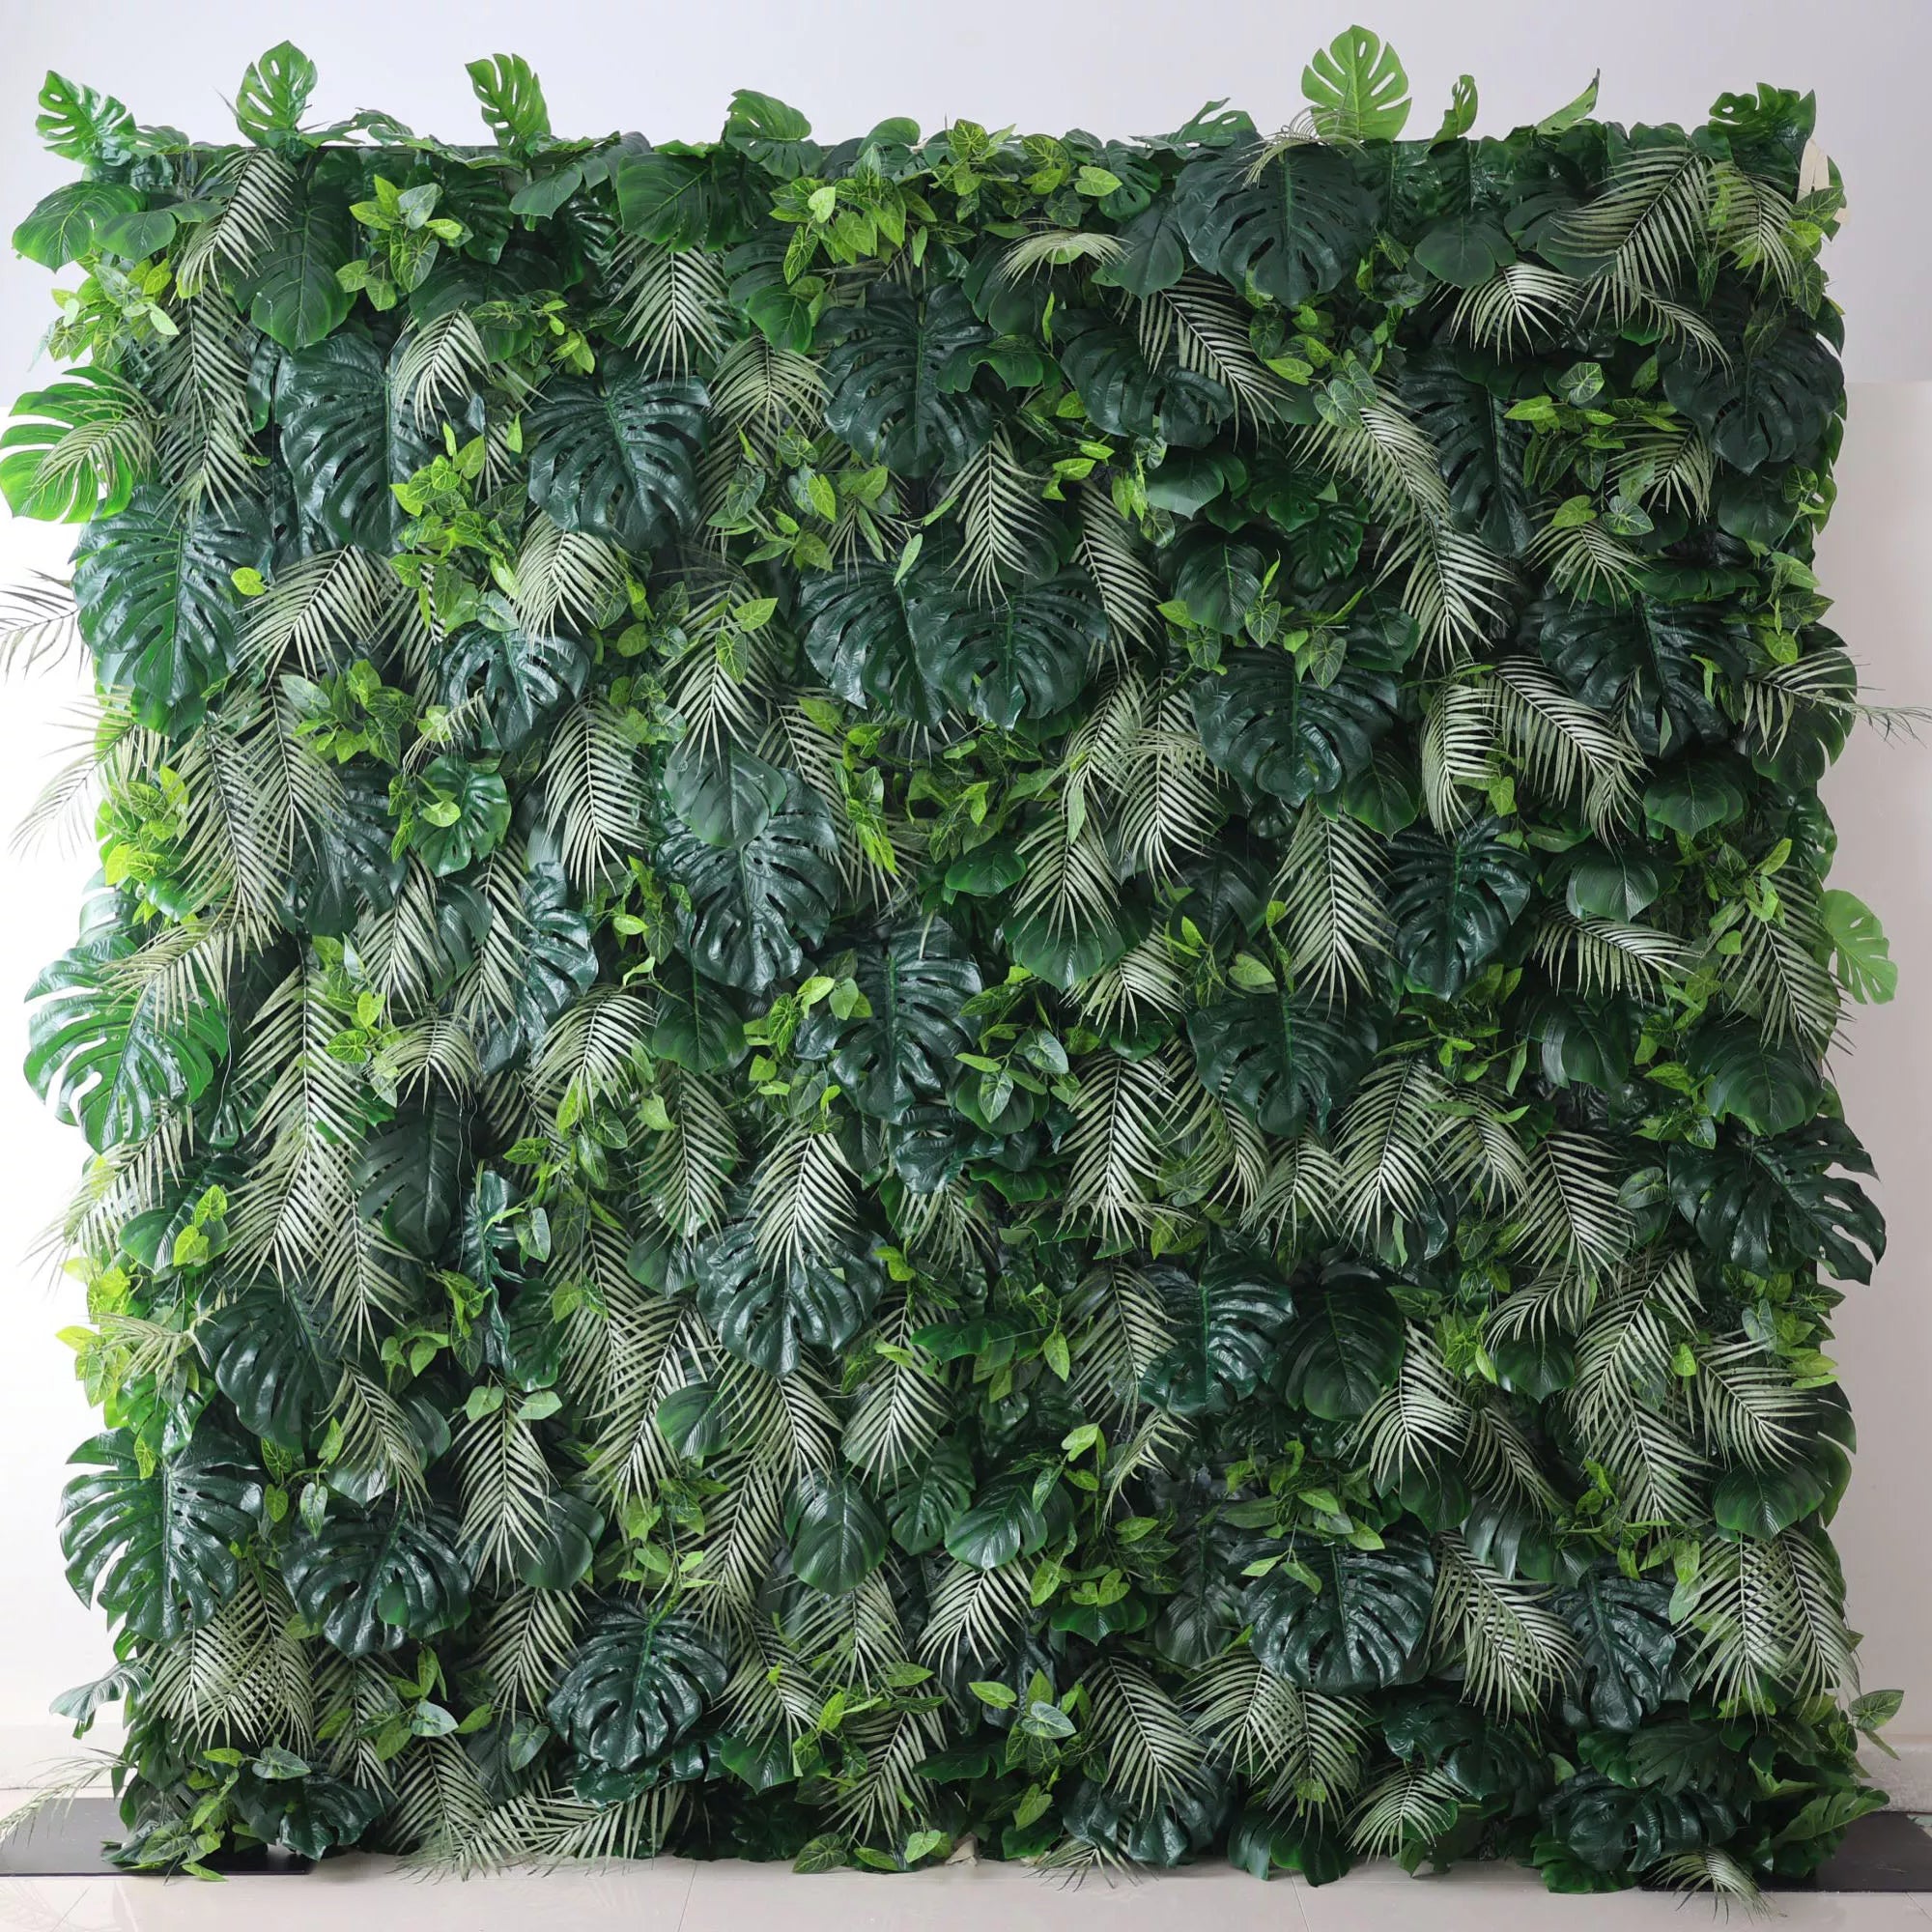 Valar Flowers' Artificial Fabric Green Wall: Tropical Eden. A luxuriant cascade of varied green leaves, meticulously crafted, capturing the heart of a tropical jungle, and radiating verdant serenity.